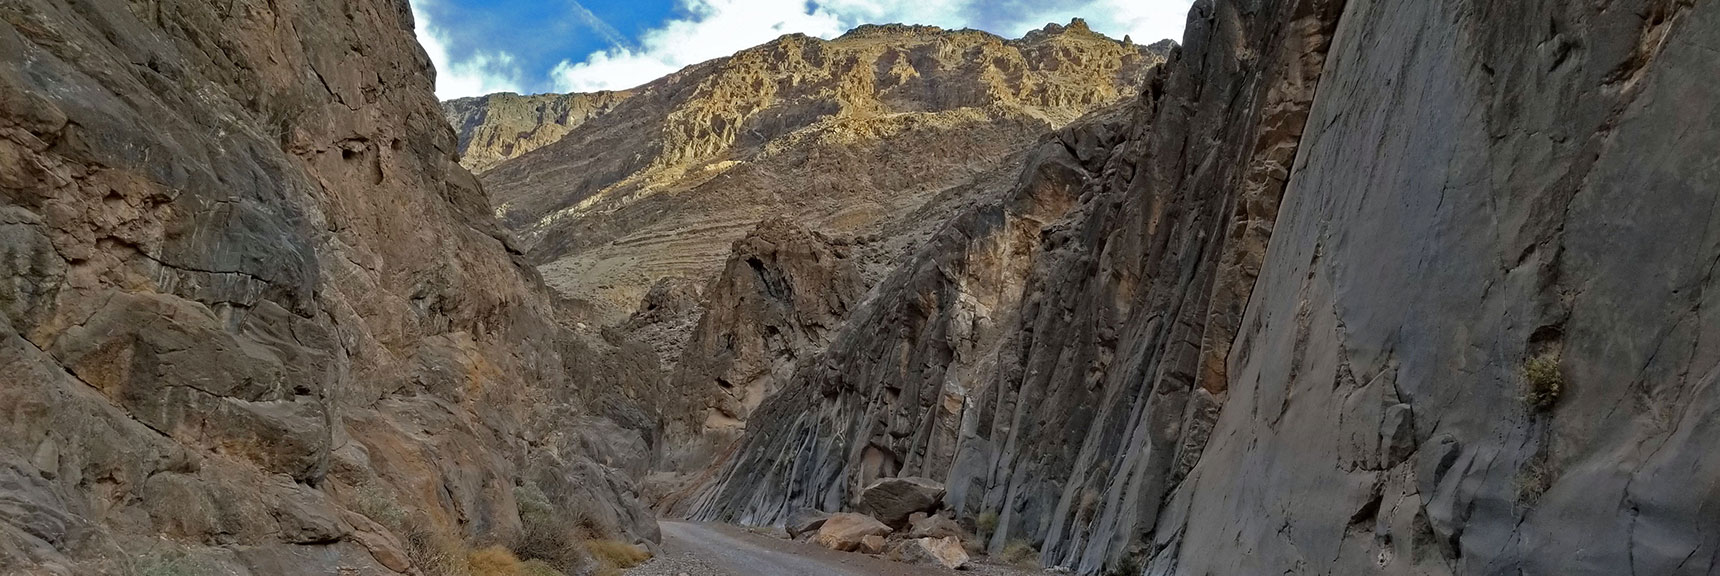 Massive Canyon Walls Rise More Sharply, Polished by Action of Water, | Titus Canyon Grand Loop by Mountain Bike | Death Valley National Park, California